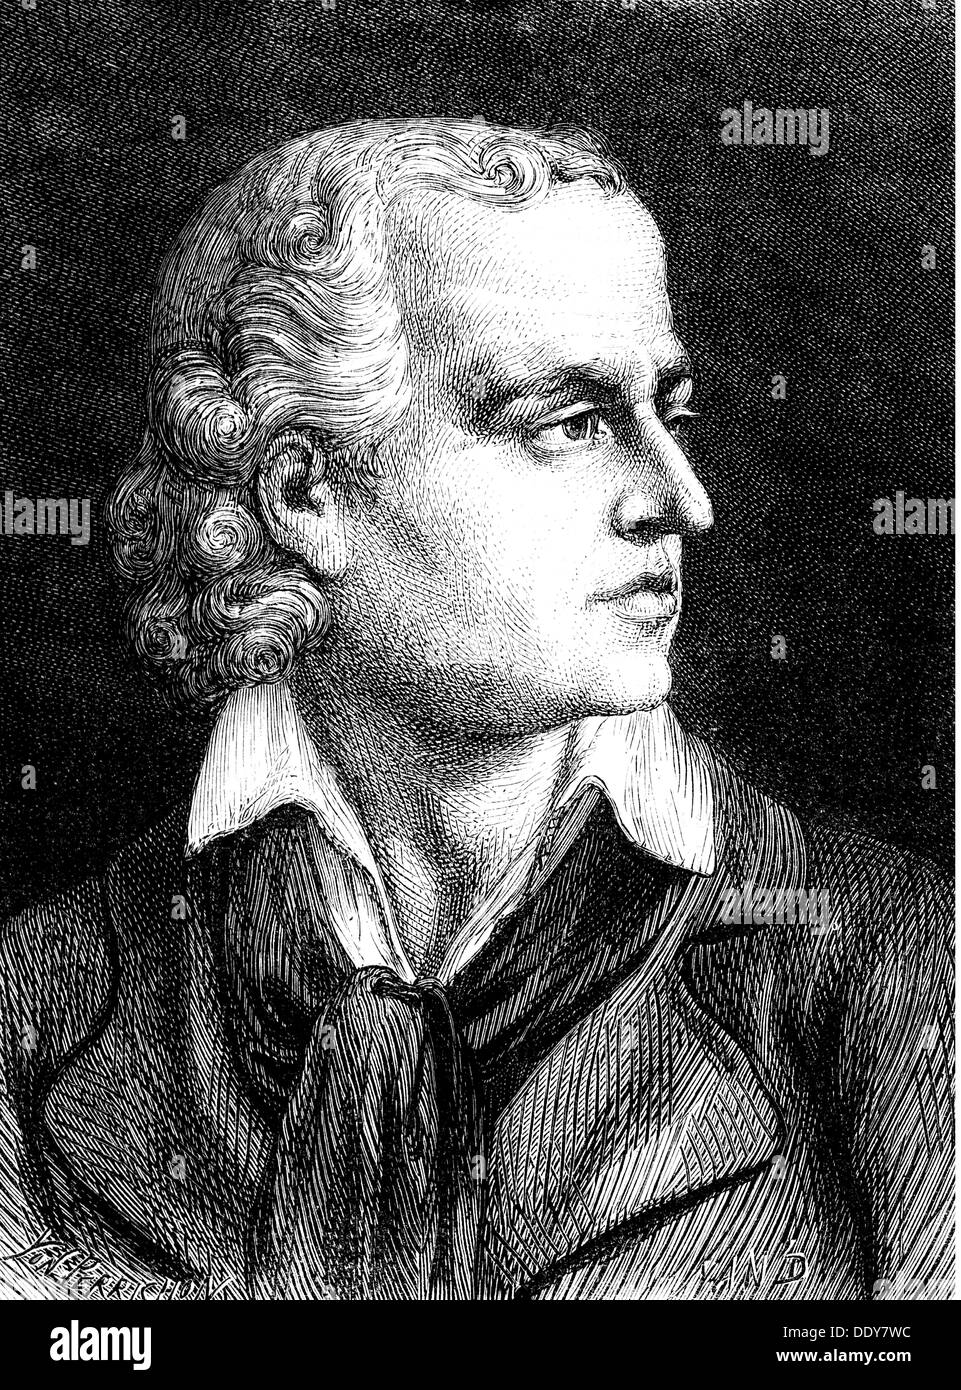 Chalier, Marie Joseph, 1747 - 17.7.1793, French politician, president of the tribunal of Lyon 1791 - 1793, portrait, wood engraving, 19th century, Stock Photo